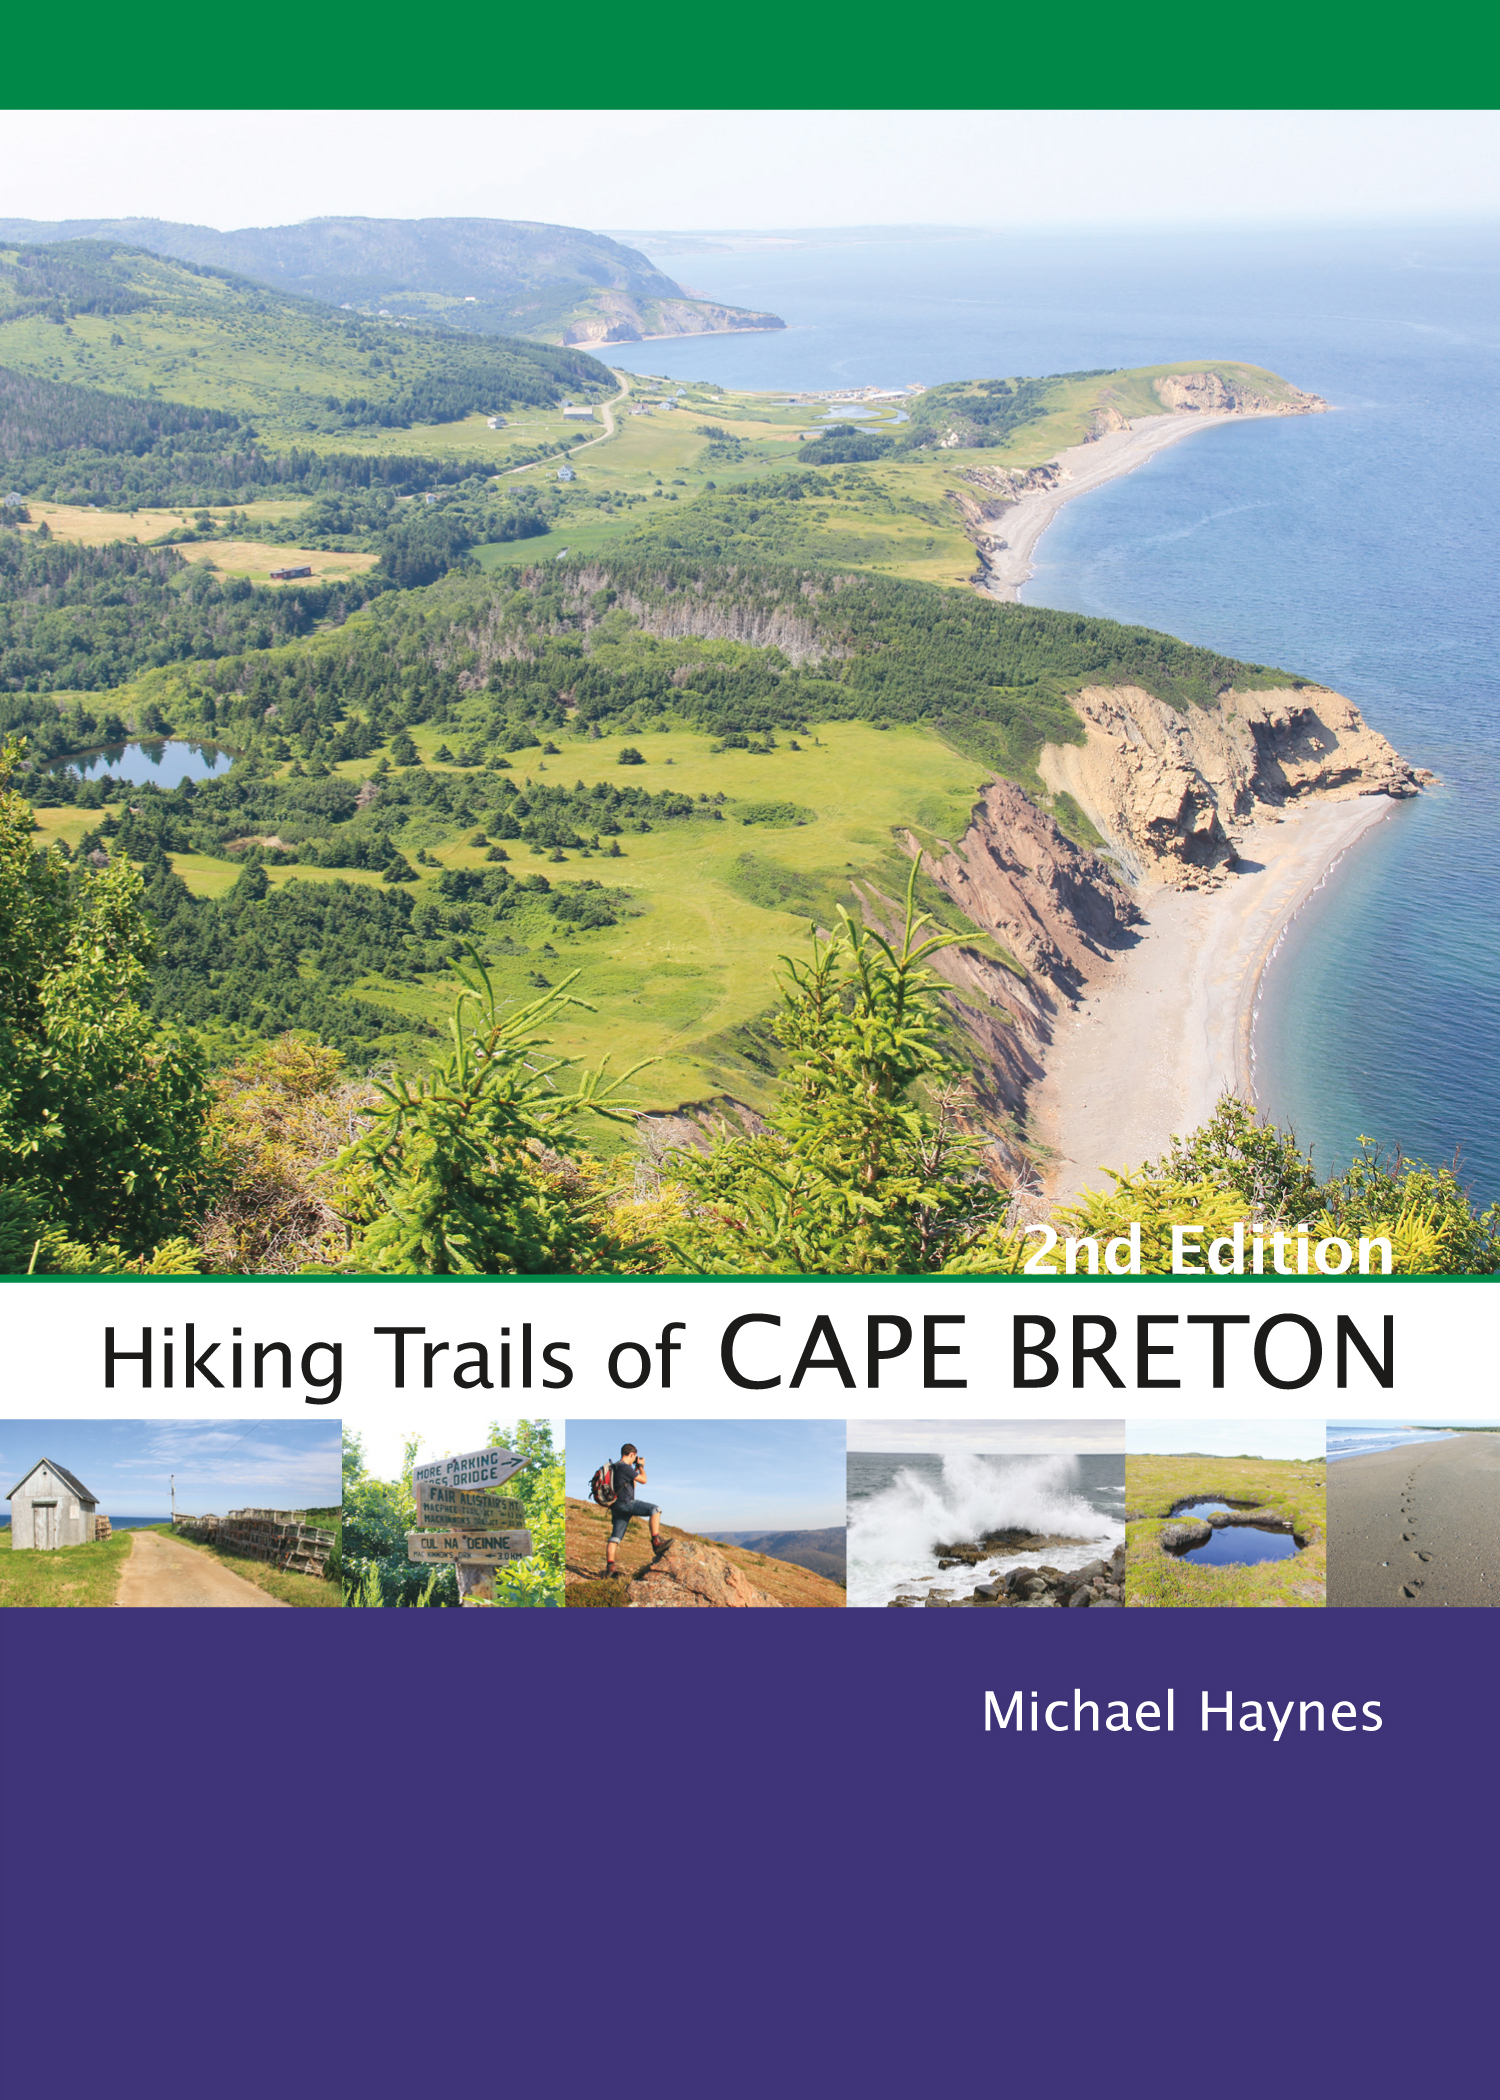 Hiking Trails of Cape Breton, 2nd Edition